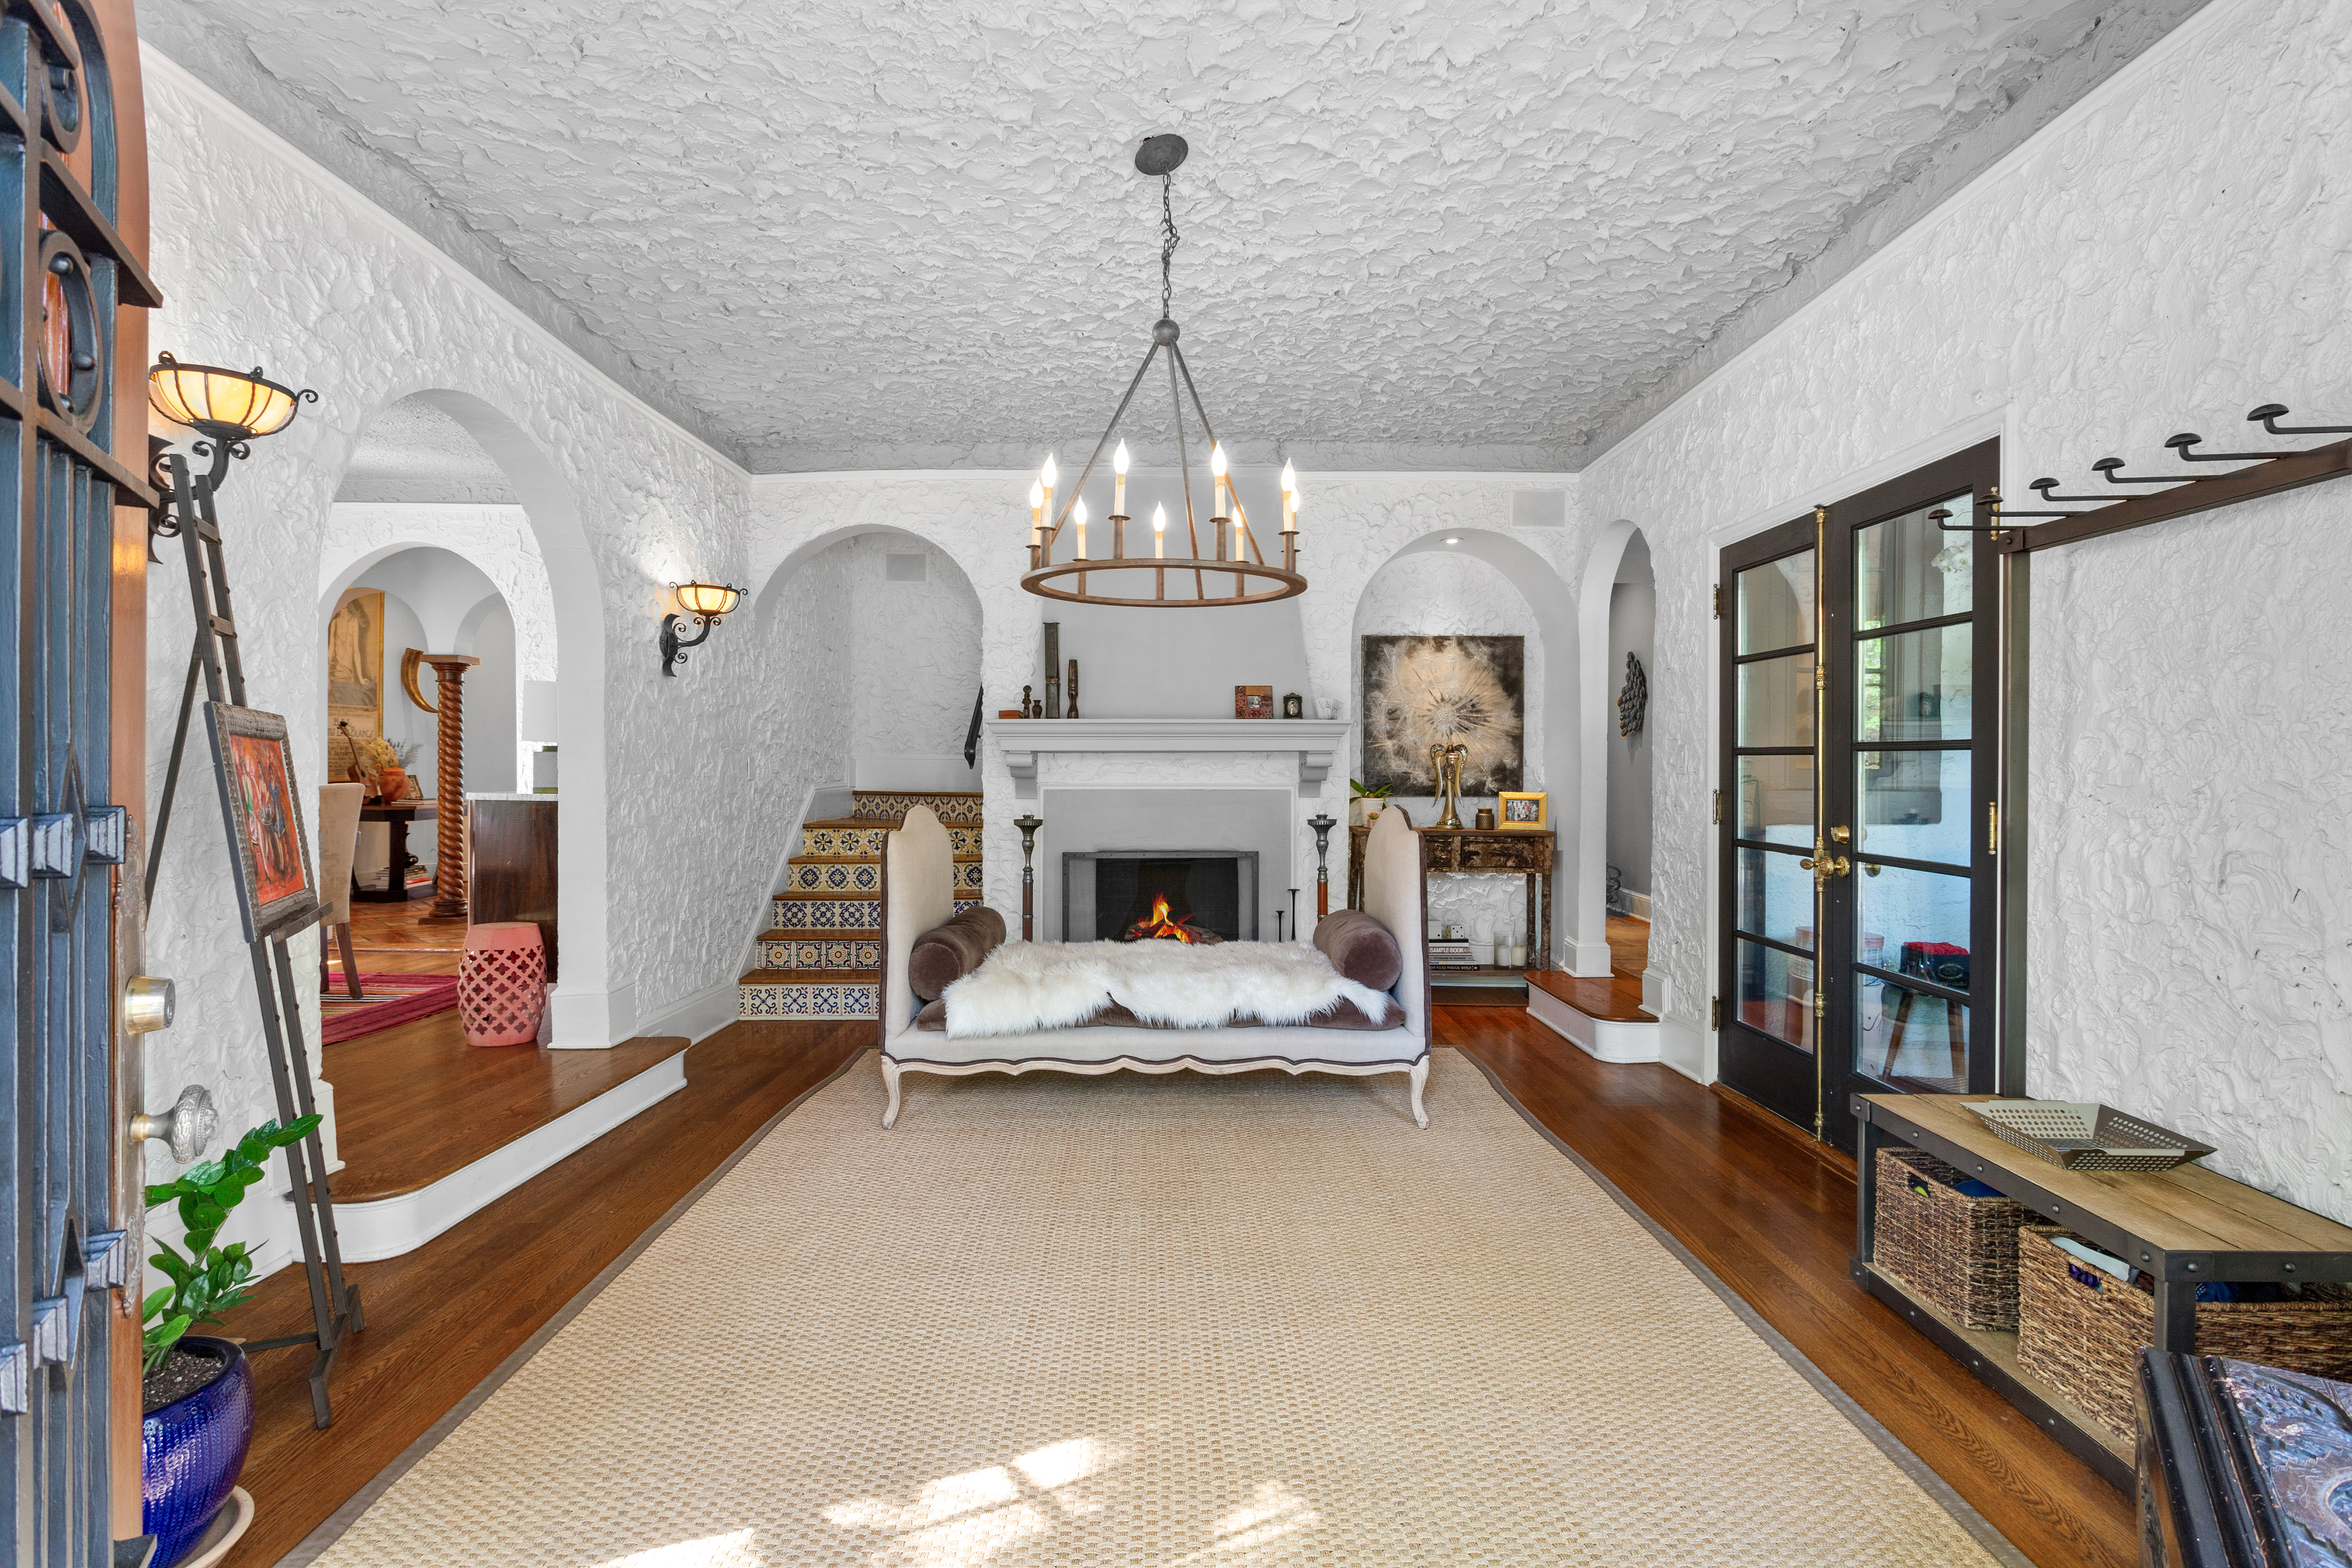 ajc.com - Hunter Boyce - $1.8m Morningside house comes with plenty of Hollywood glamour